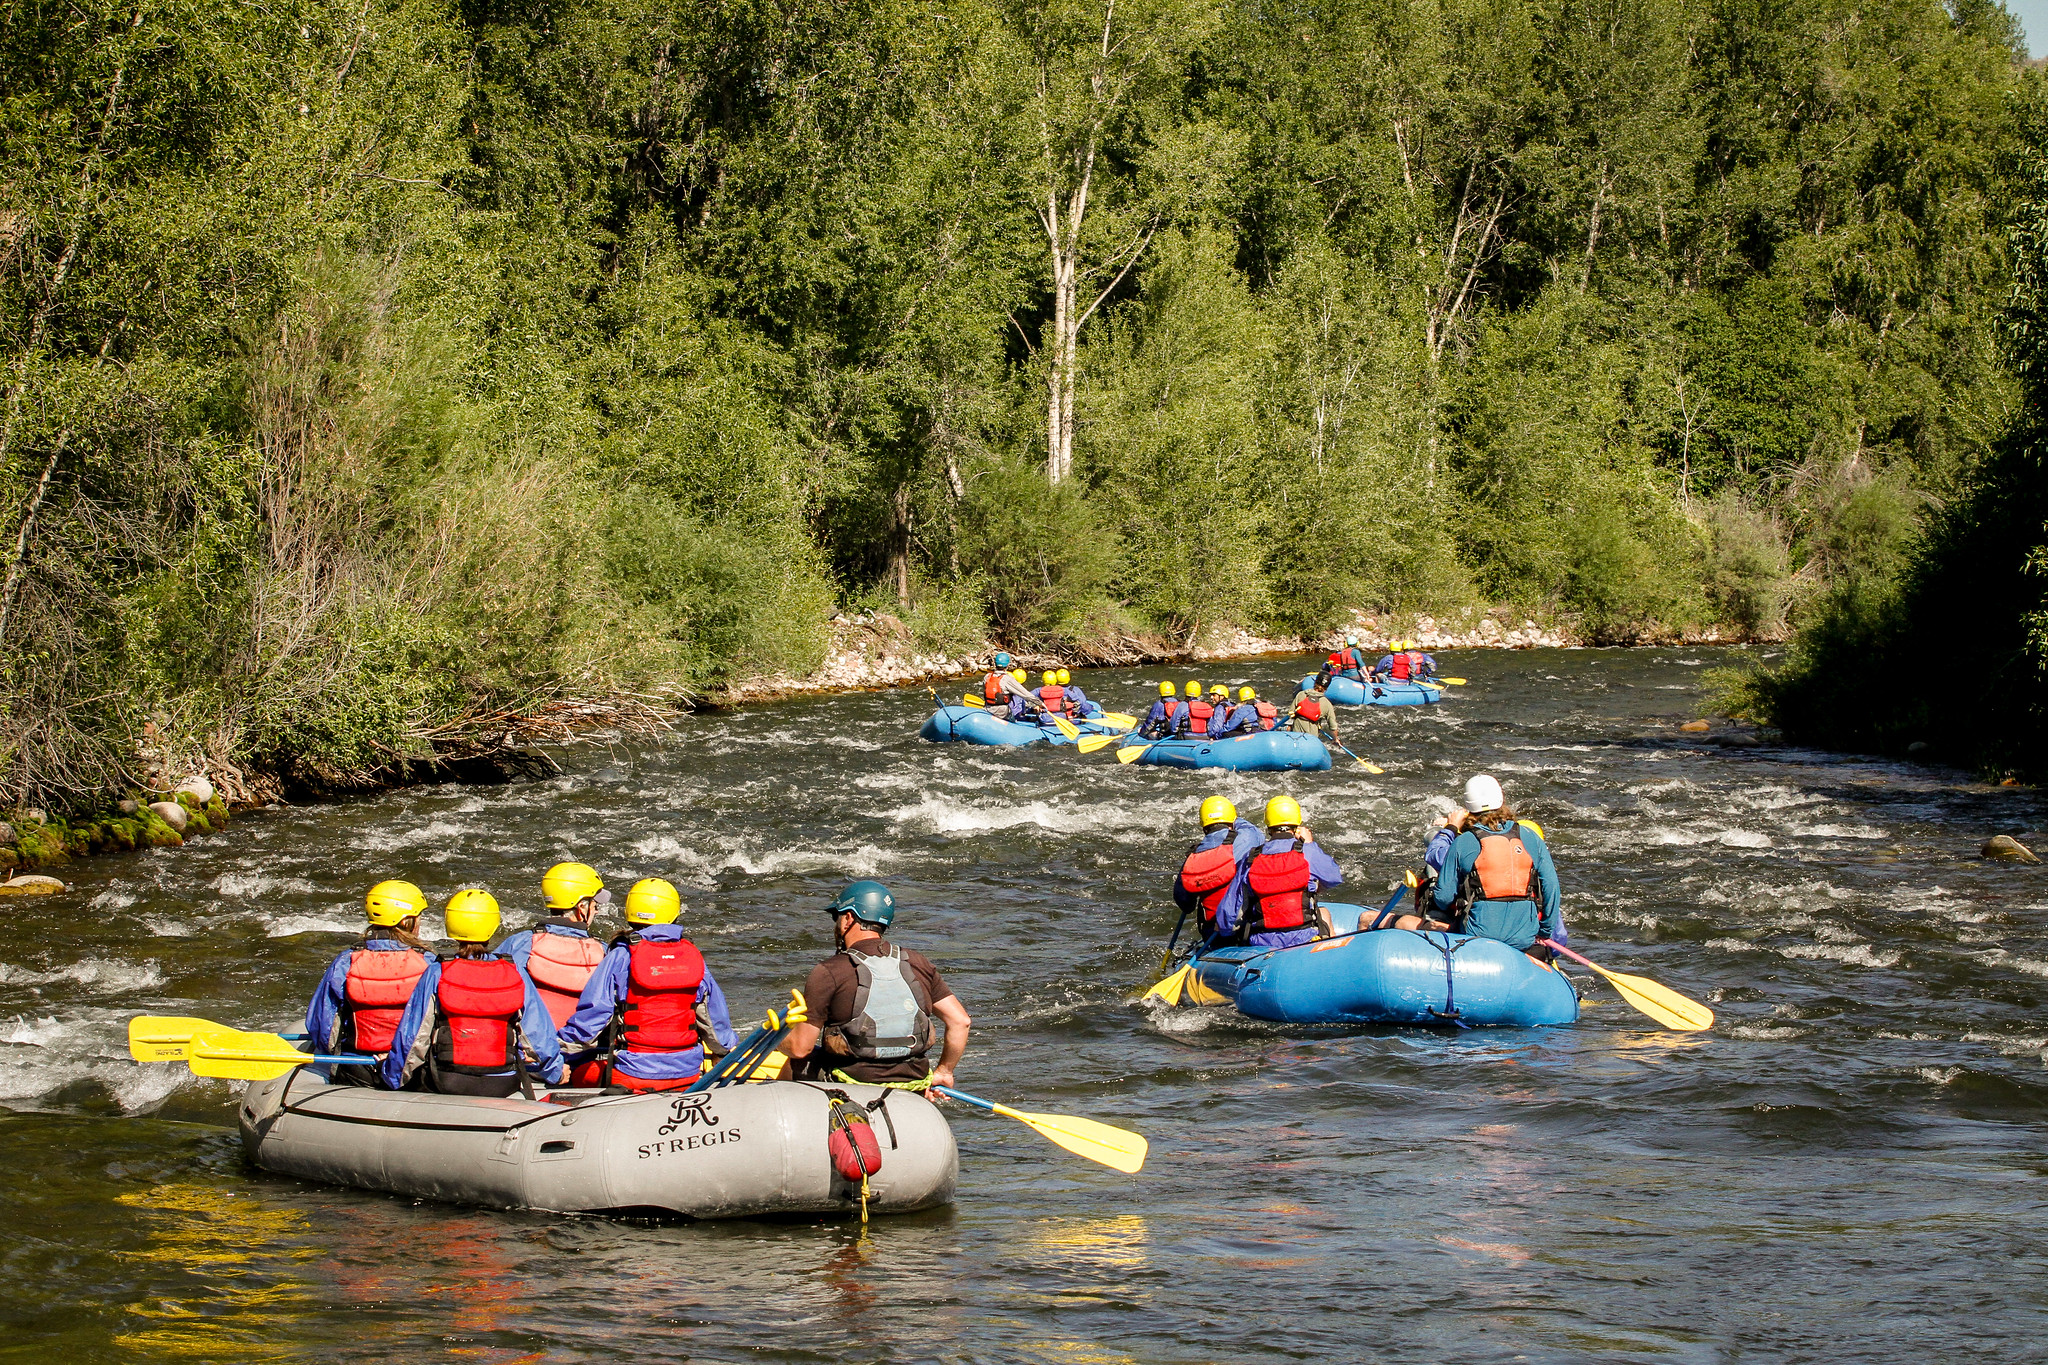 Multiple inflatable whitewater rafting rafts floating on a calm section of river